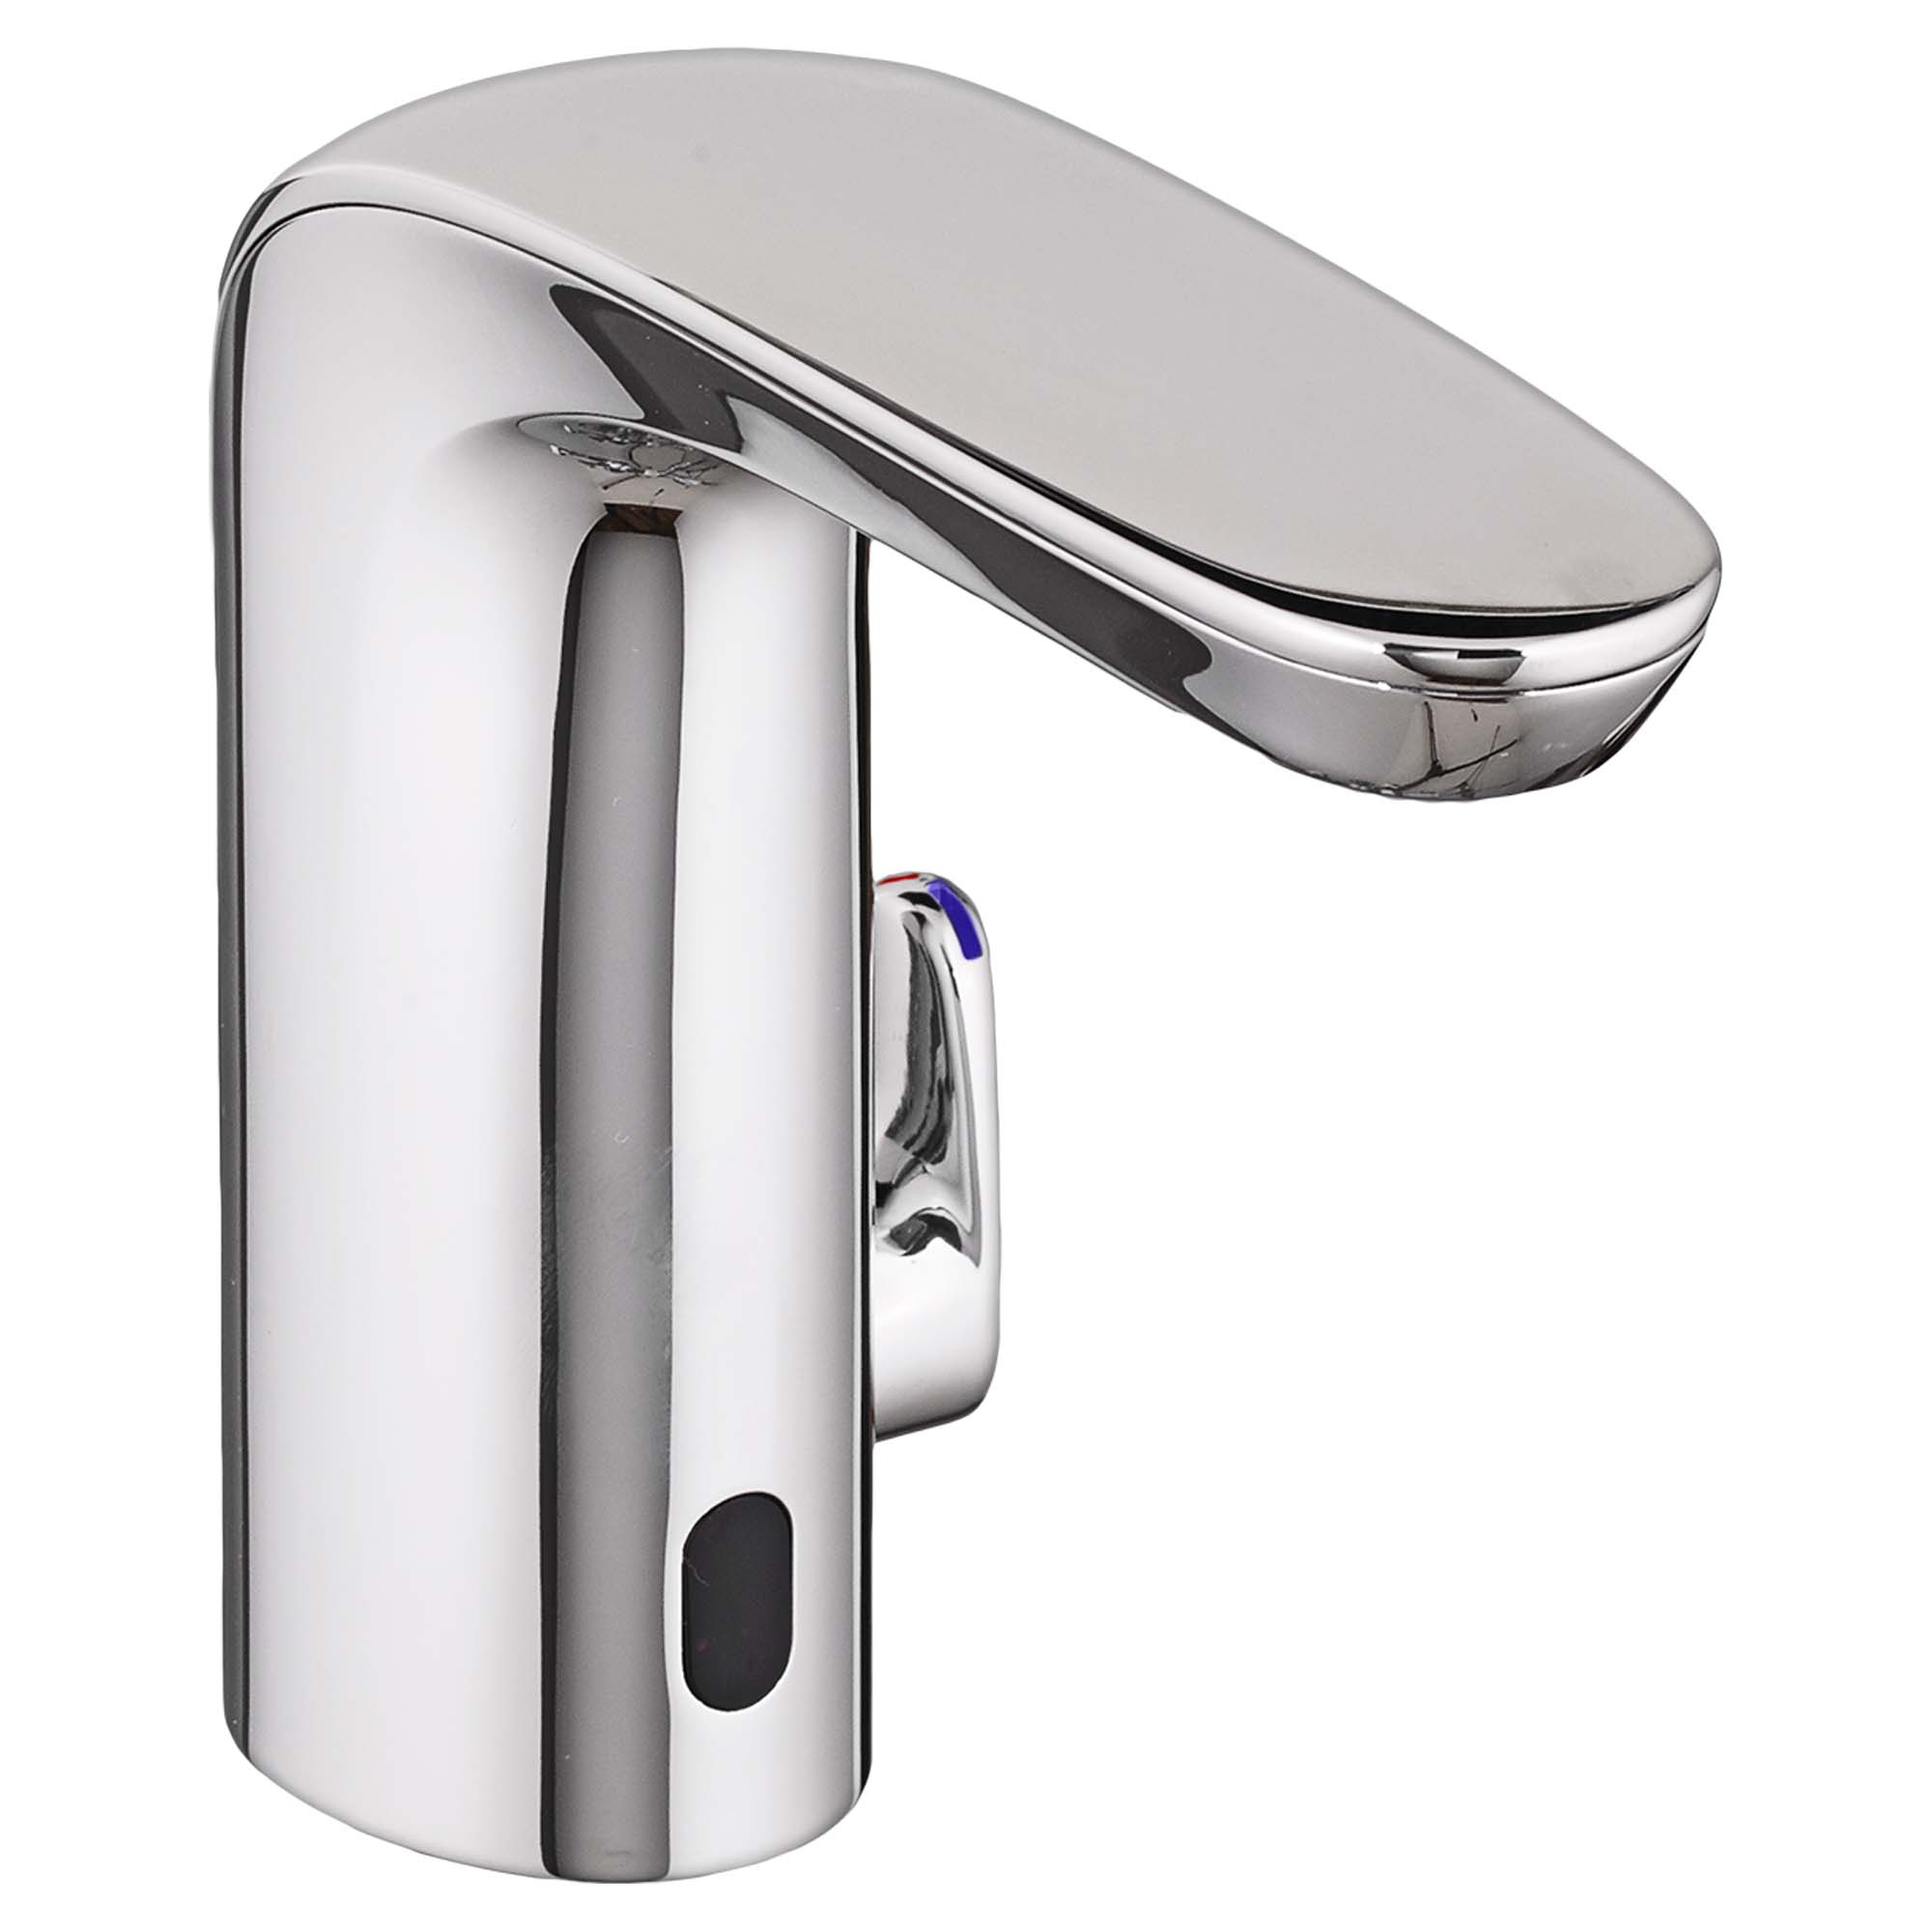 NextGen™ Selectronic™ Touchless Faucet, Base Model With SmarTherm Safety Shut-Off + ADM, 1.5 gpm/5.7 Lpm